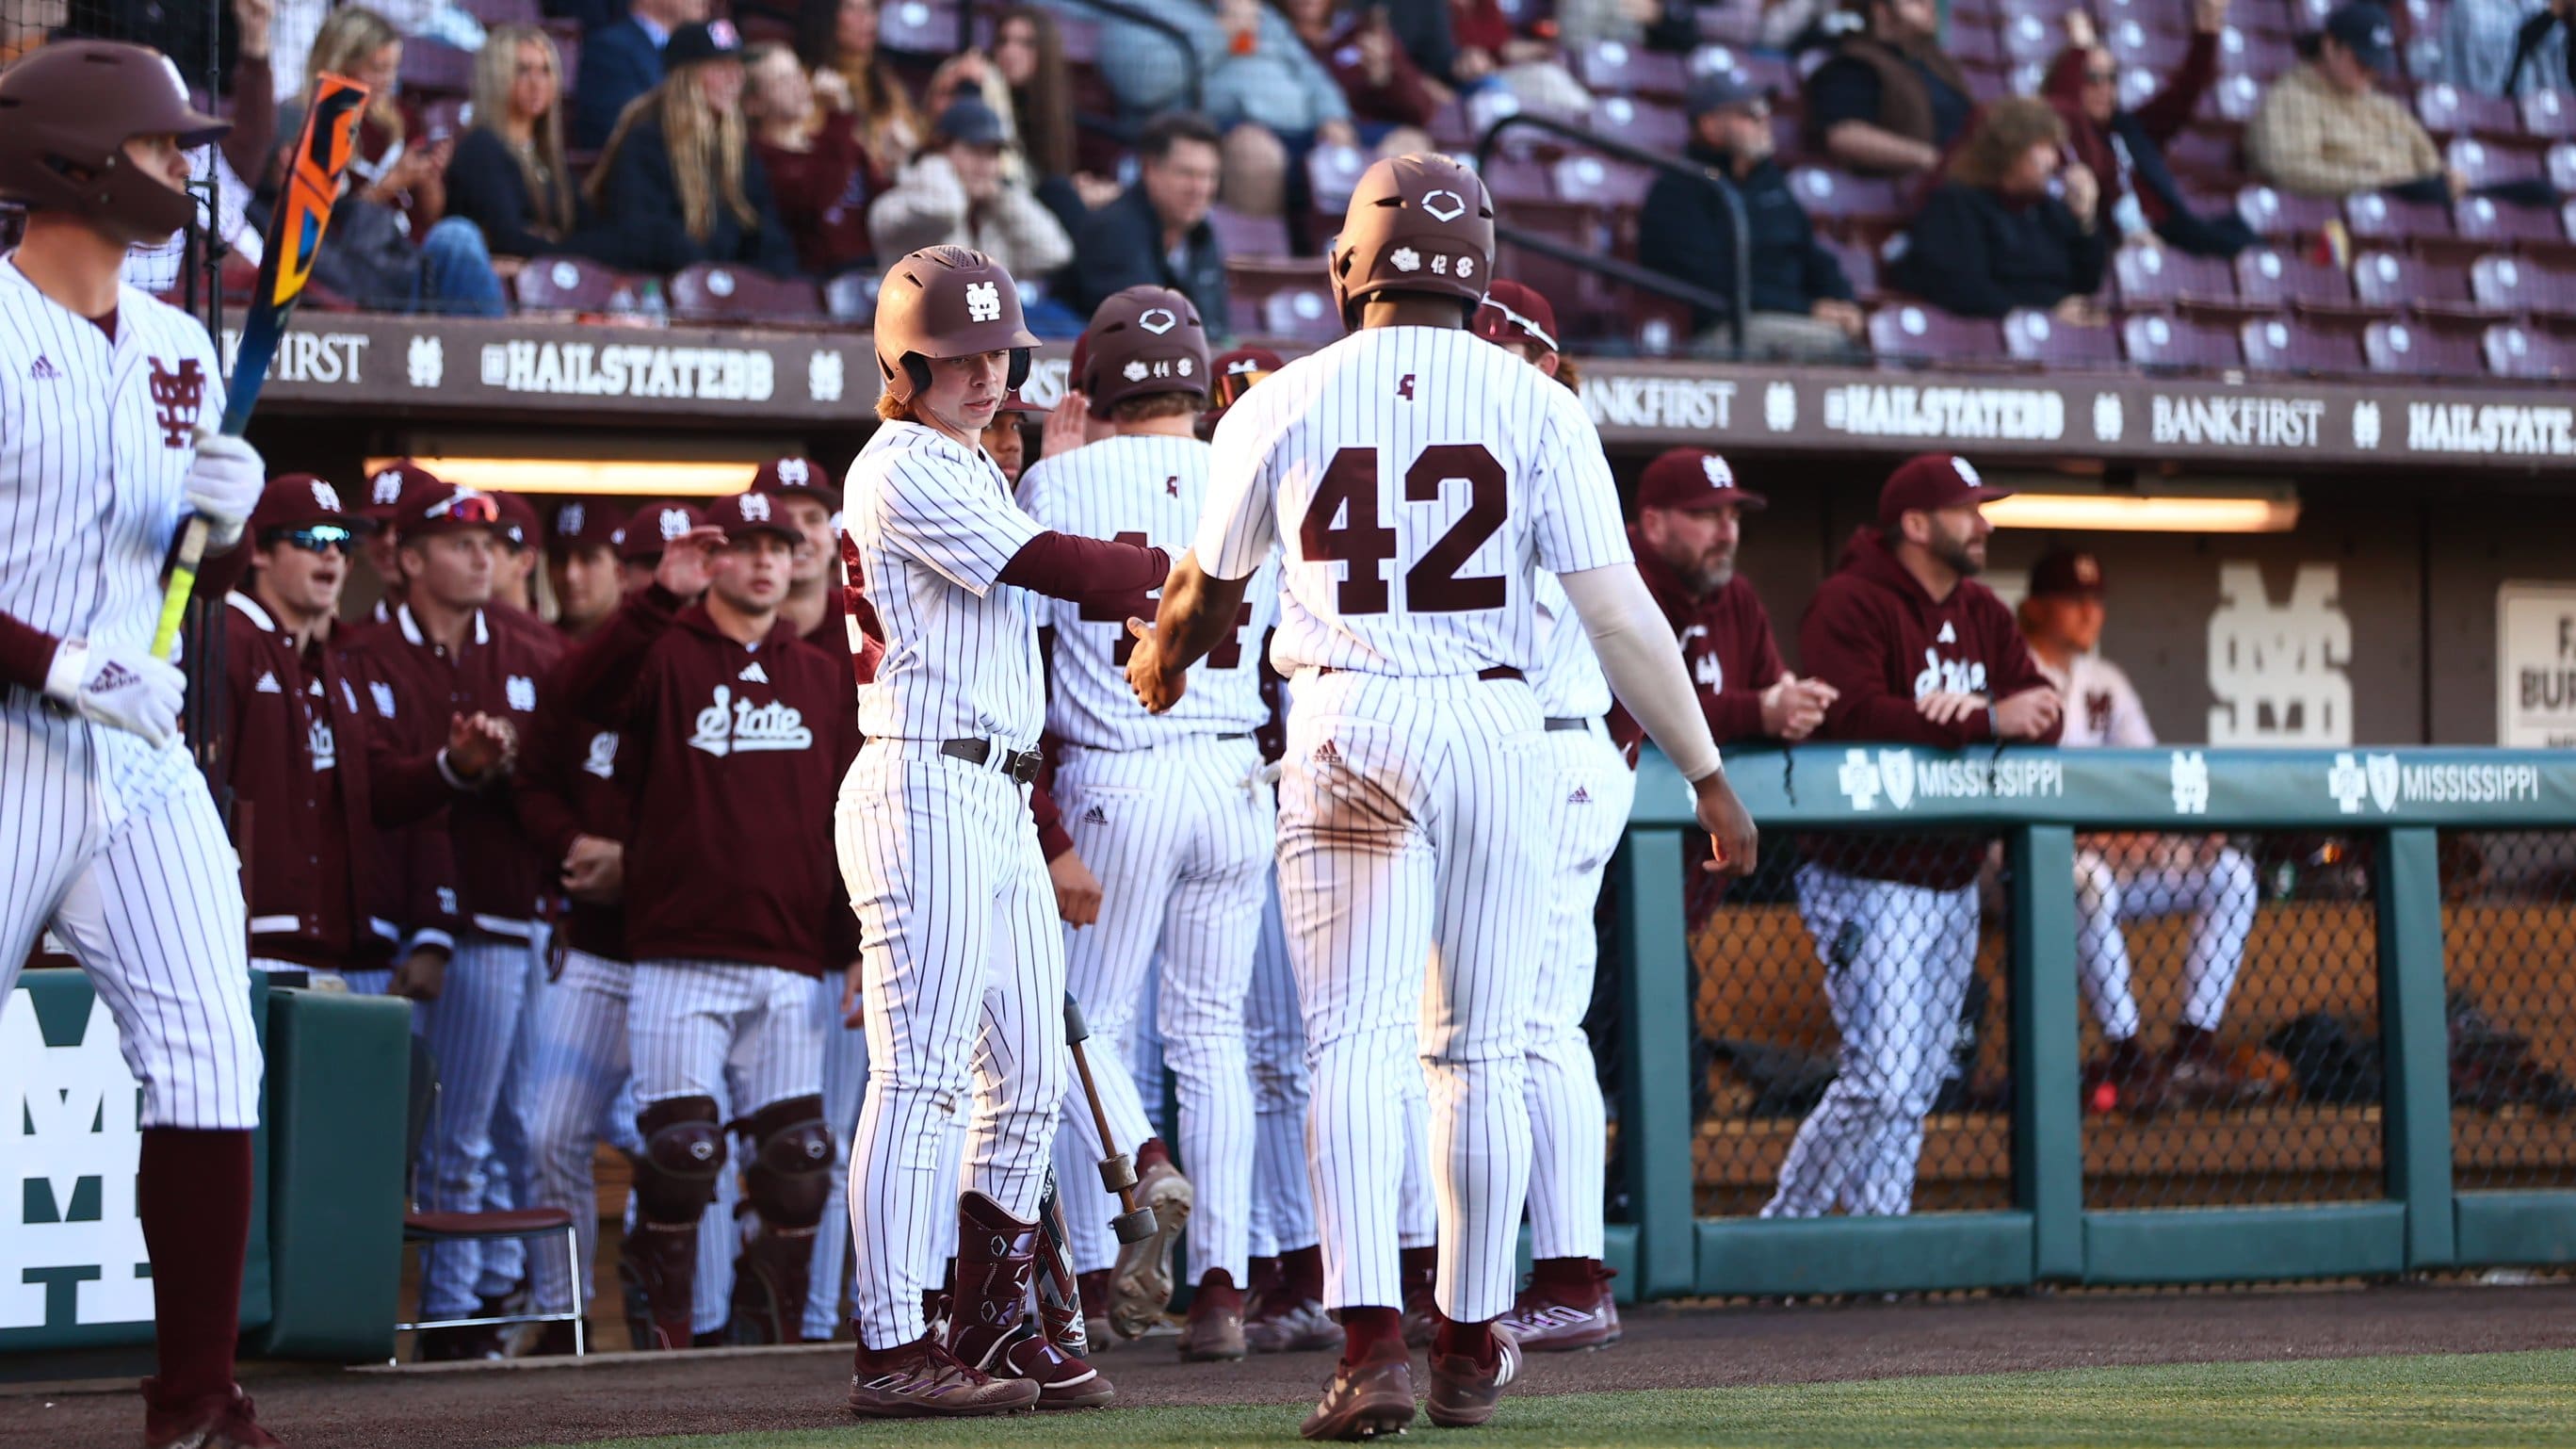 Mississippi State Baseball extends winning streak with 6-4 victory over Memphis Tigers